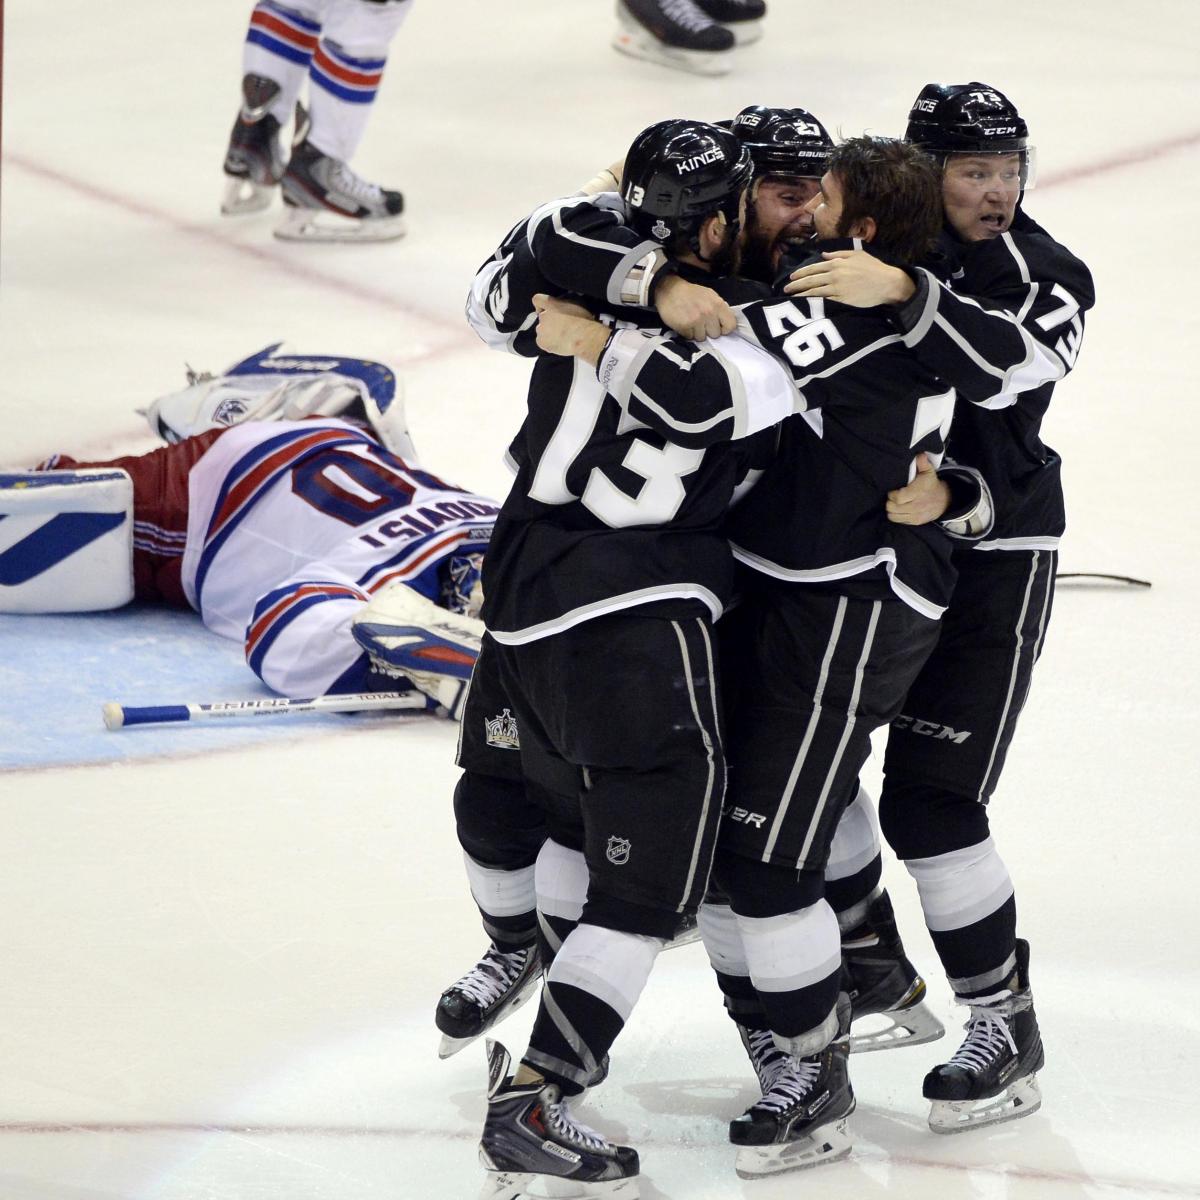 New York Rangers are in Stanley Cup Finals. Will the LA Kings join